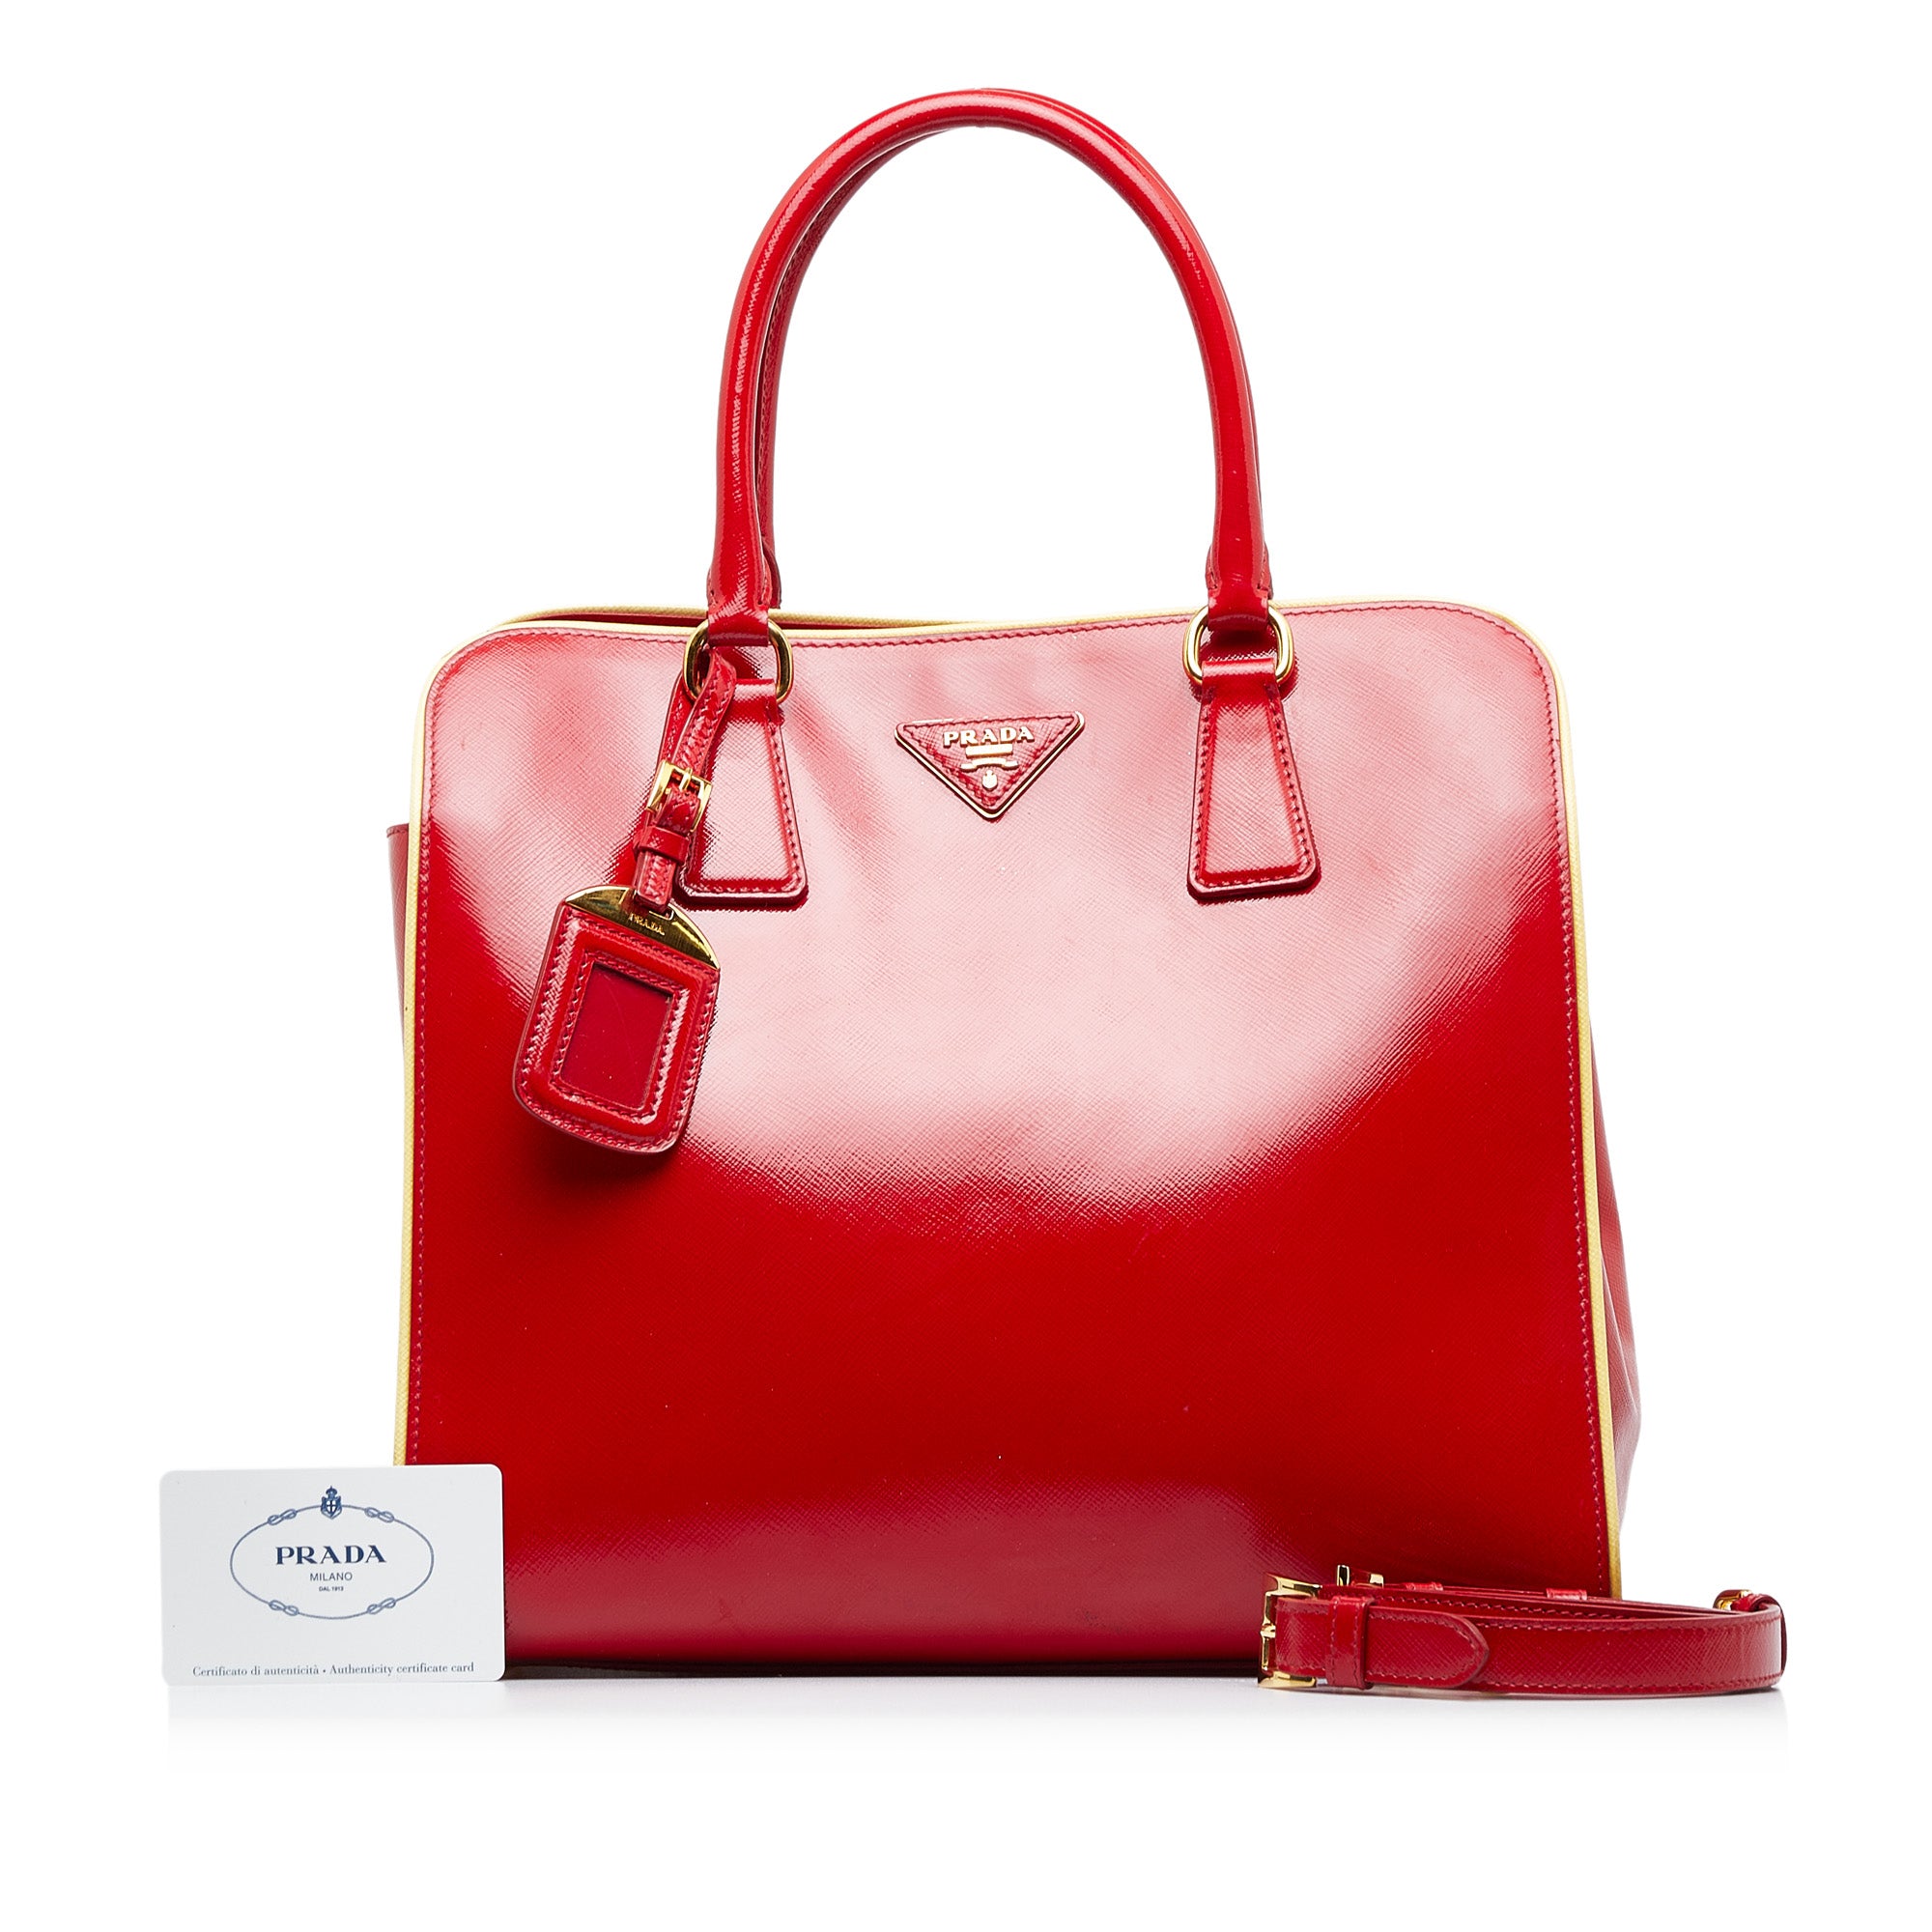 Louis Vuitton - Authenticated Purse - Patent Leather Red Plain for Women, Never Worn